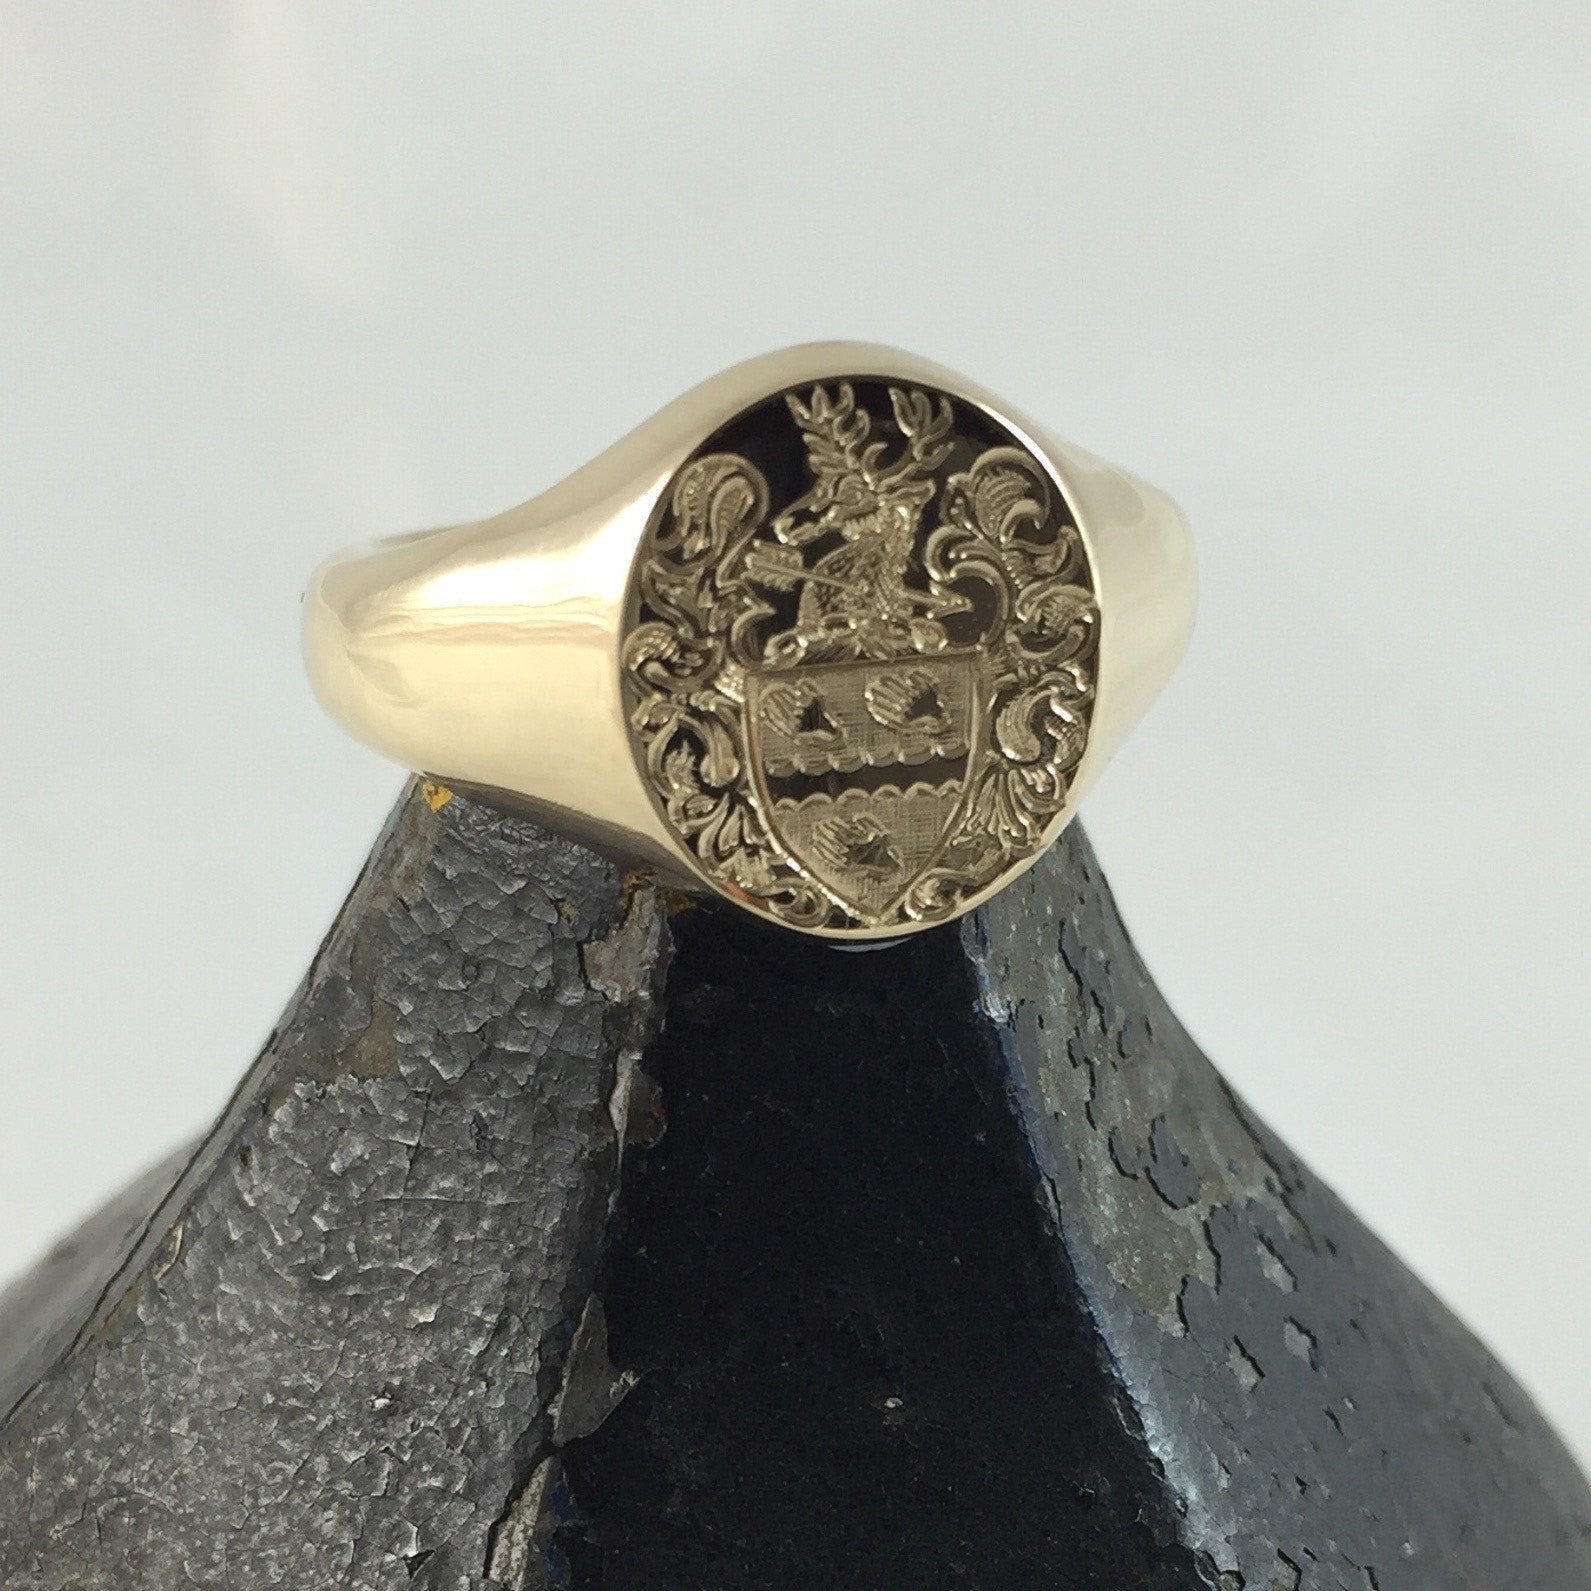 Family Coat of Arms Surface Engraved 14mm x 12mm - 9 Carat Yellow Gold ...